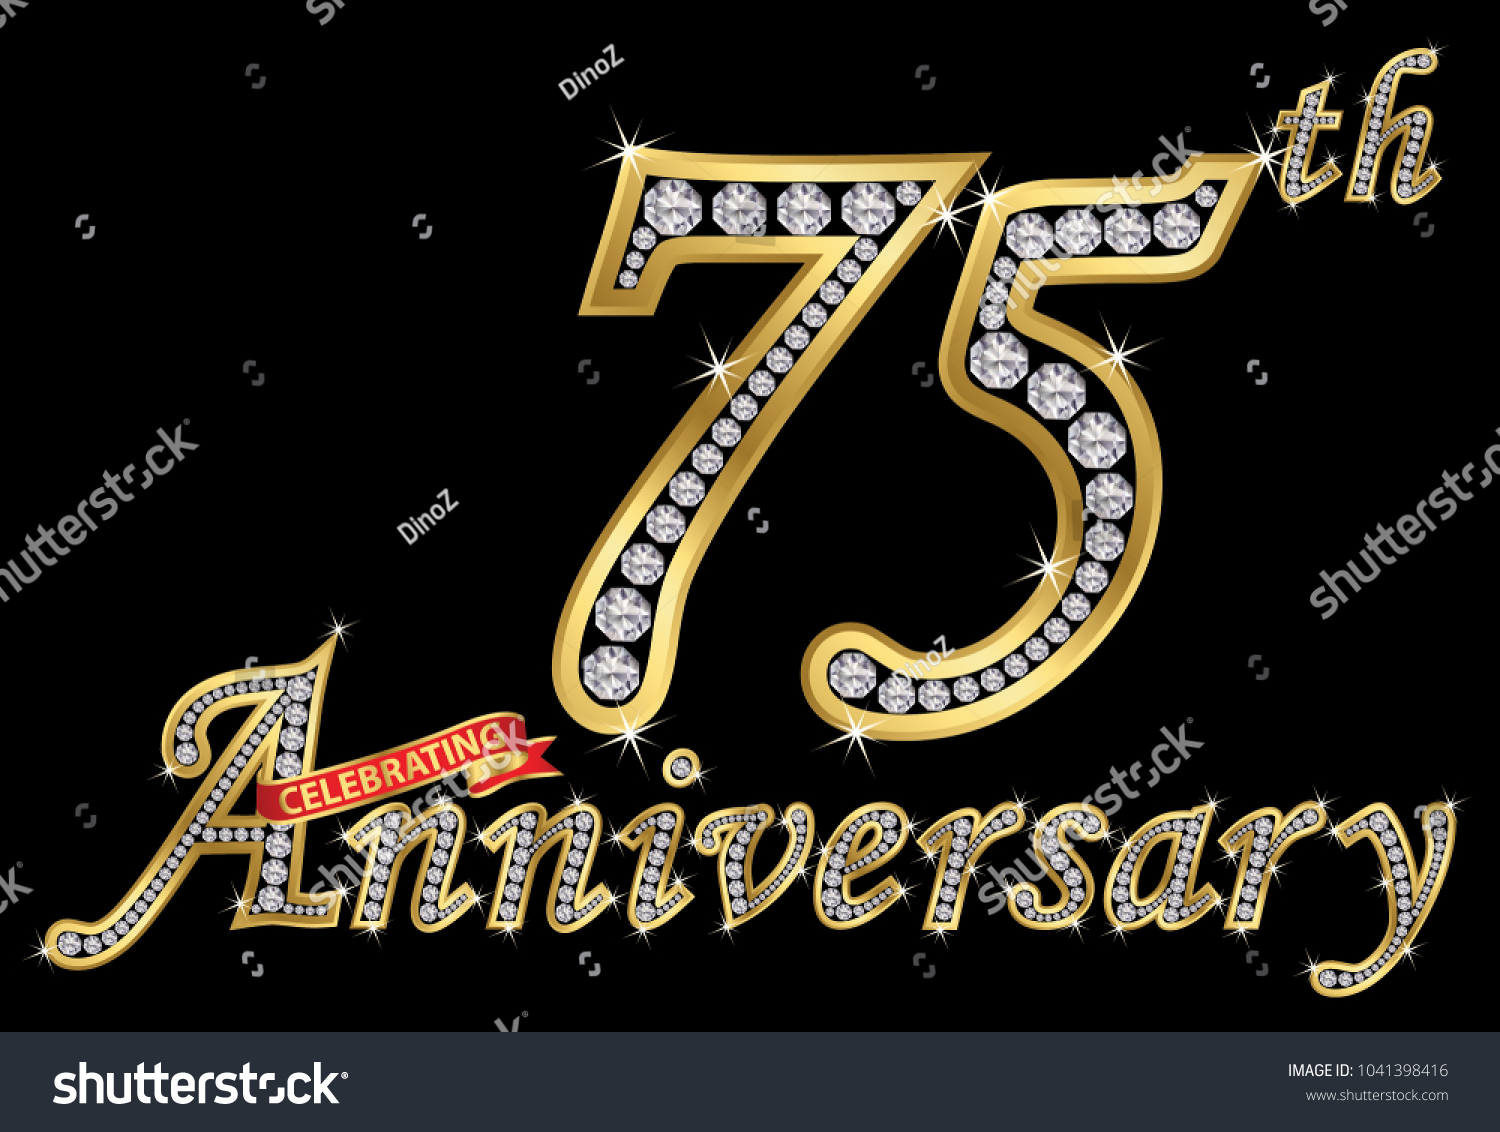 SVG of Celebrating  75th anniversary golden sign with diamonds, vector illustration svg